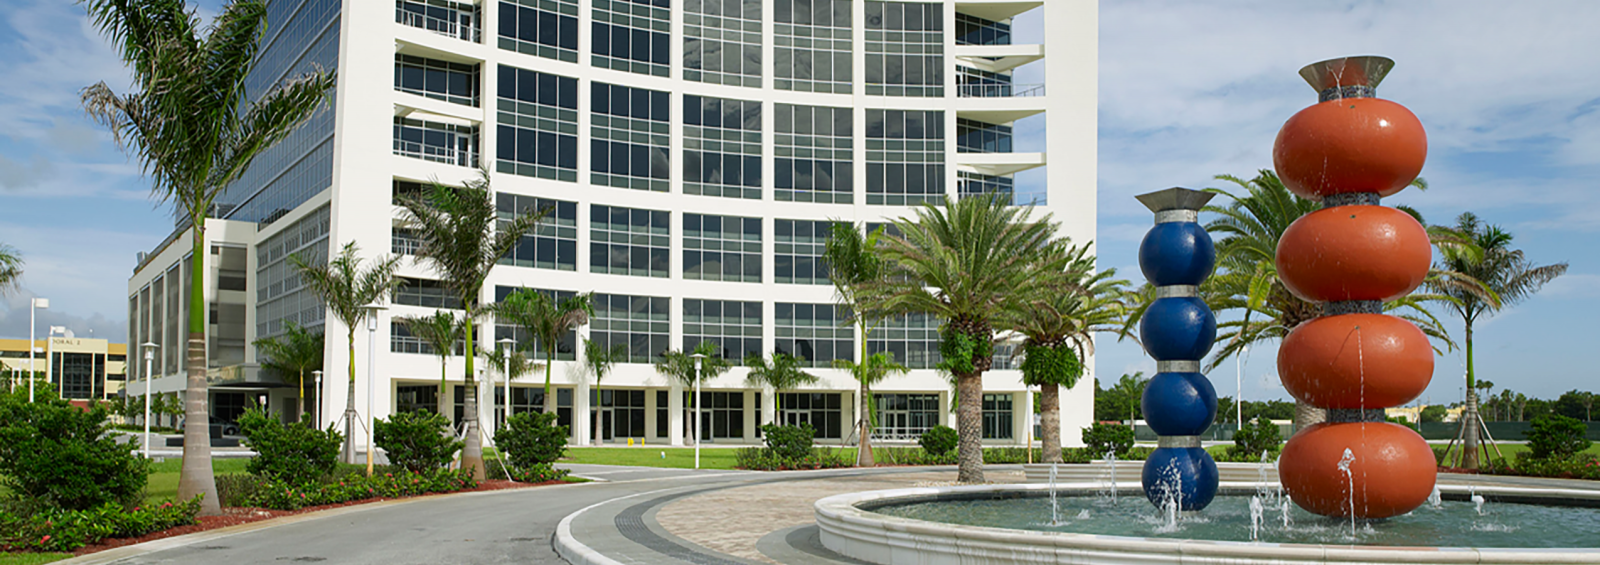 One Park Square At Doral 1 1 2550x900 Acf Cropped